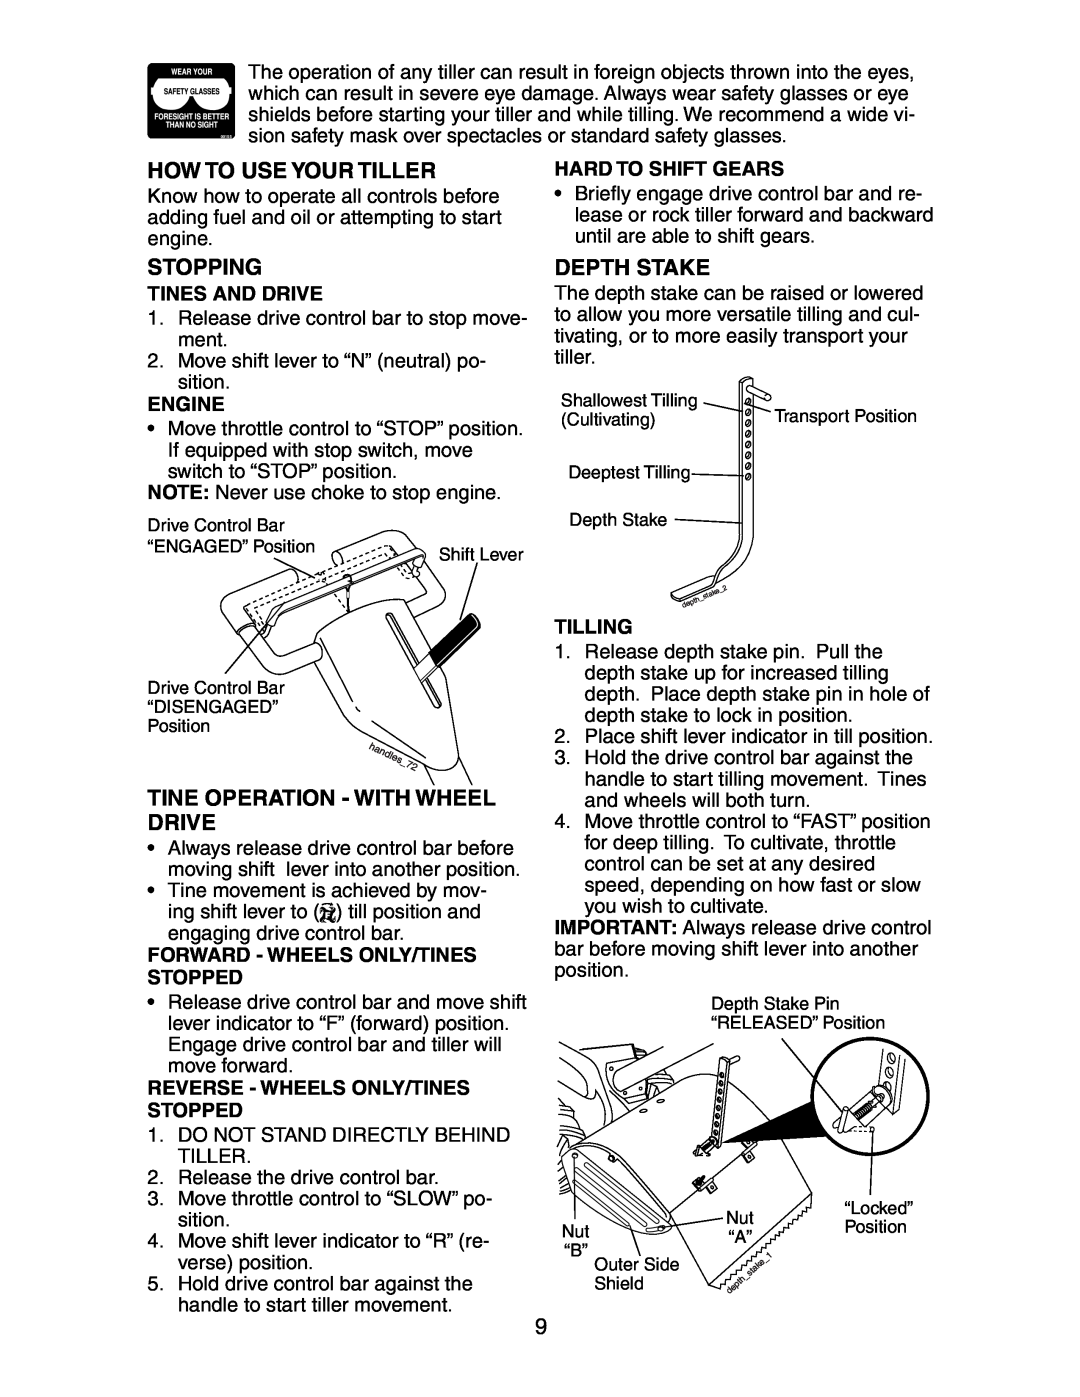 Sears 917.29425 How To Use Your Tiller, Stopping, Tine Operation - With Wheel Drive, Depth Stake, Hard To Shift Gears 